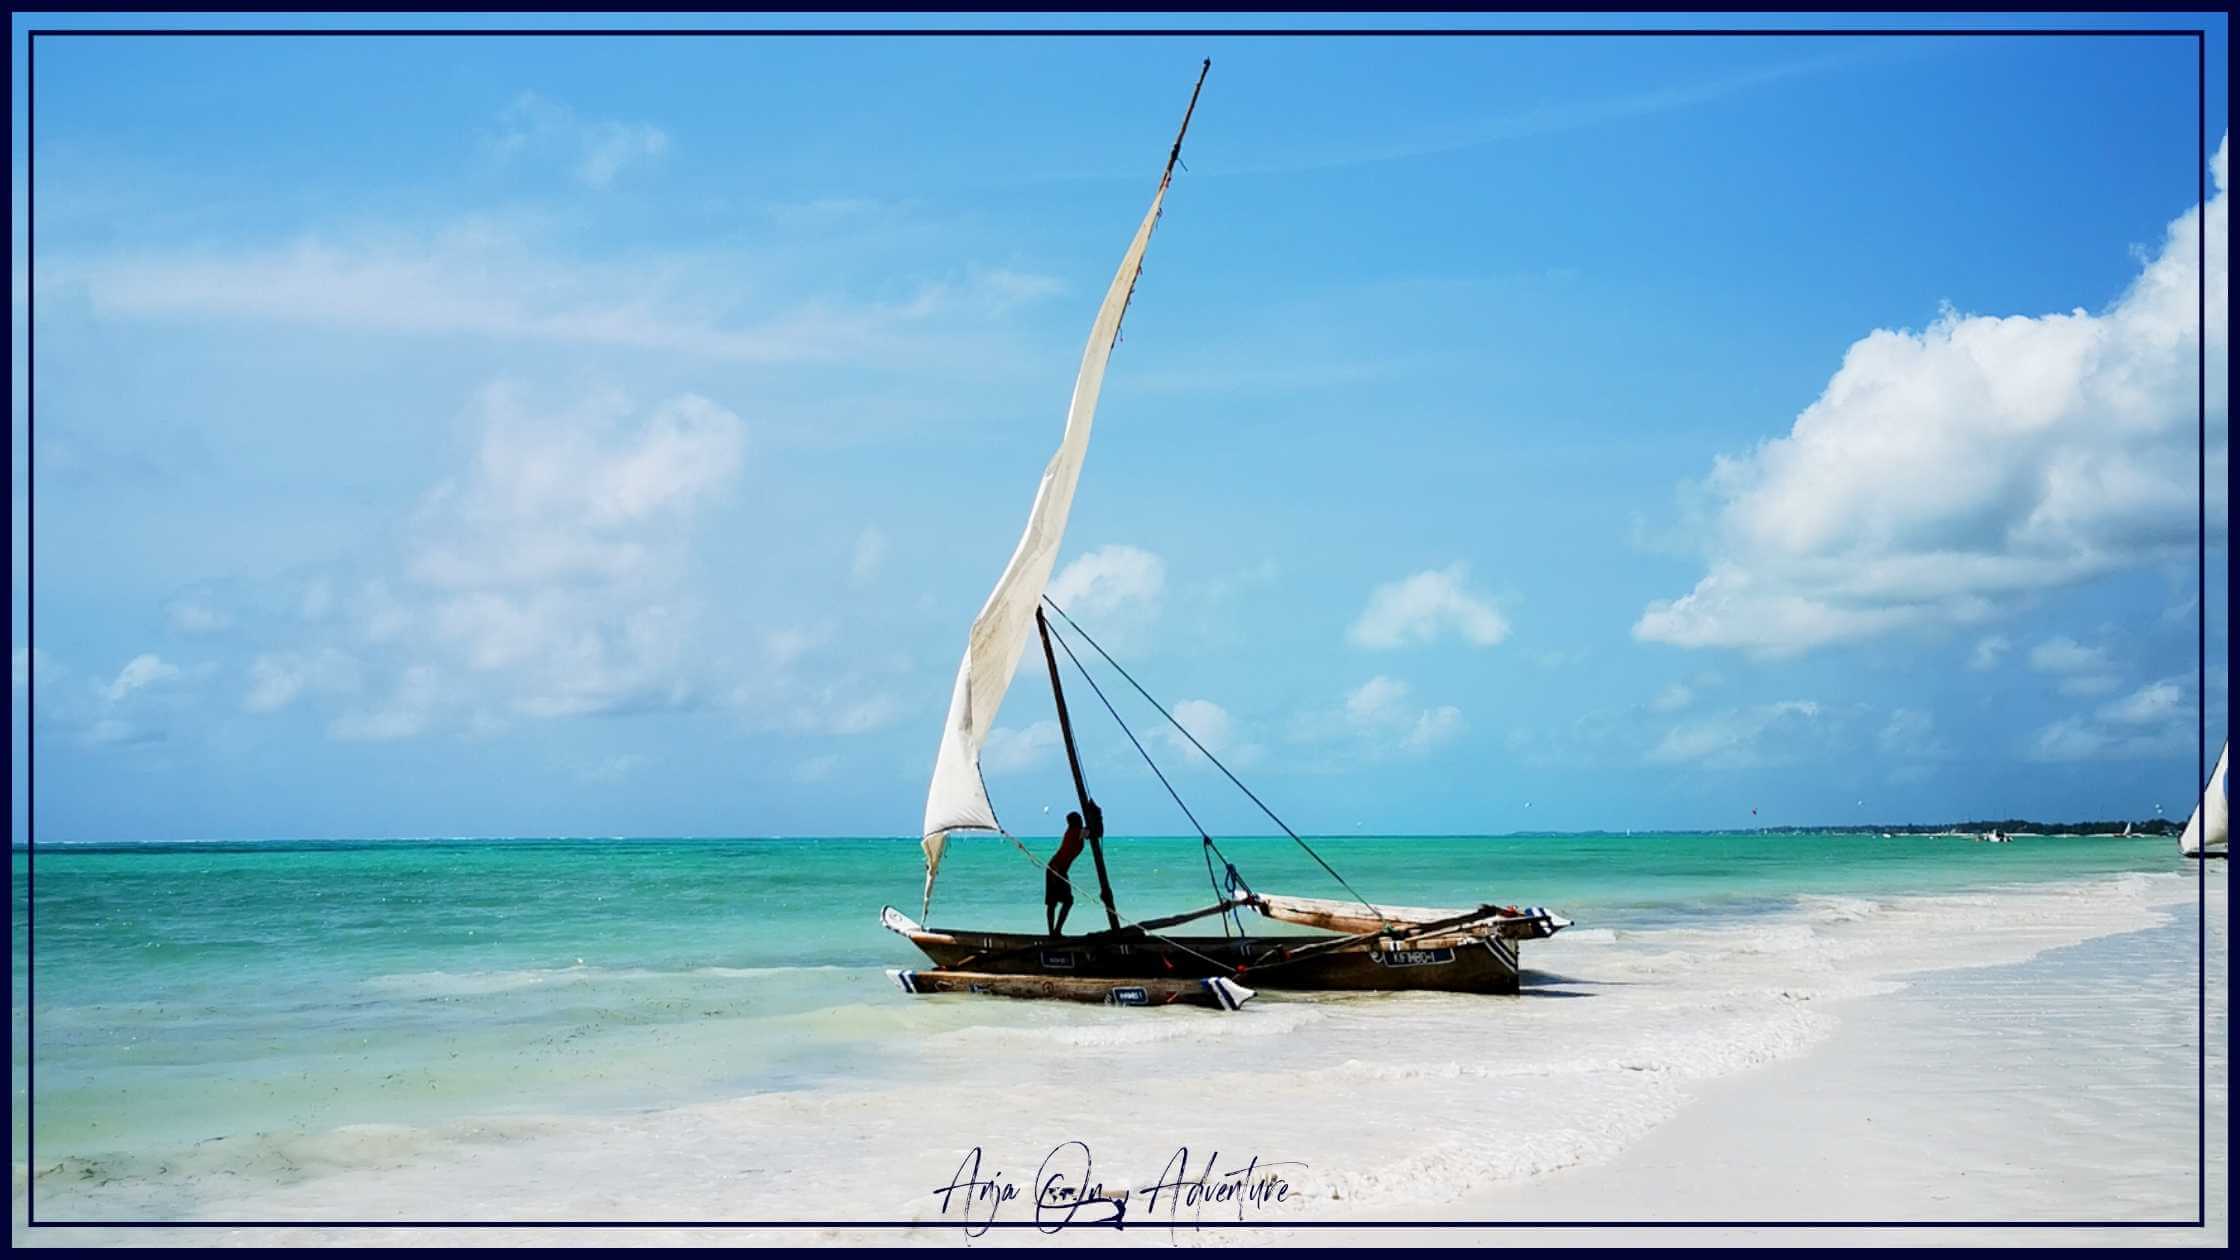 This Zanzibar itinerary will give you an idea of how to spend 12 days in Zanzibar. A blend of relaxed holiday with time to explore best beached in Zanzibar. You will meet Aldabra tortoises, starfish, Red Colobus monkey in Jozani Forest. In UNESCO World Heritage Stone town you will learn about the dark history and slave trade.

| Travel itinerary | Zanzibar | East Africa | Tanzania | Travel plan

#jambiani #itinerary #tropicalisland #zanzibarisland #travelitinerary #vacationplan